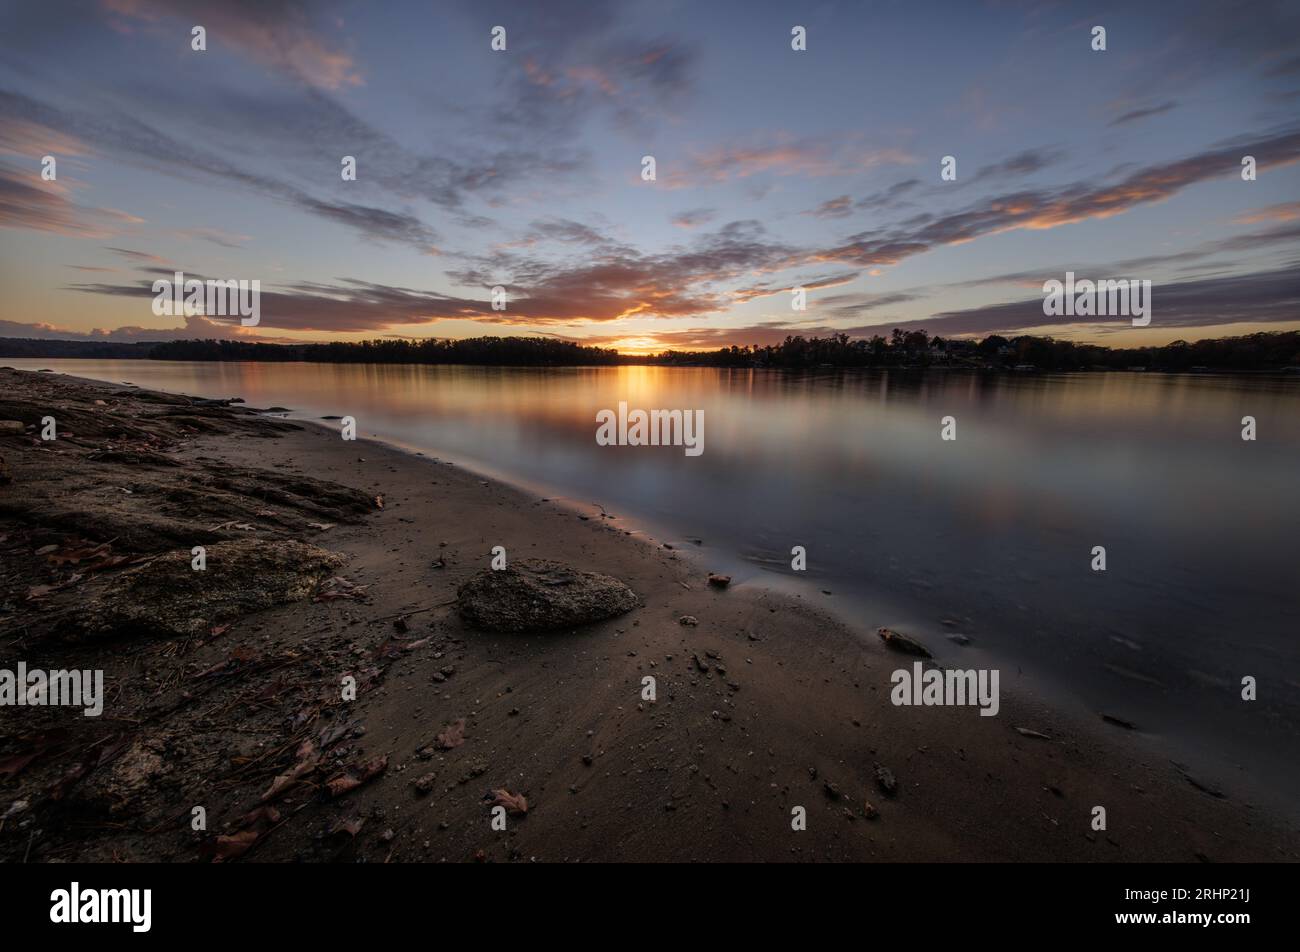 The sun sets over the calm surface of Lake Lanier at Holly Park. Stock Photo